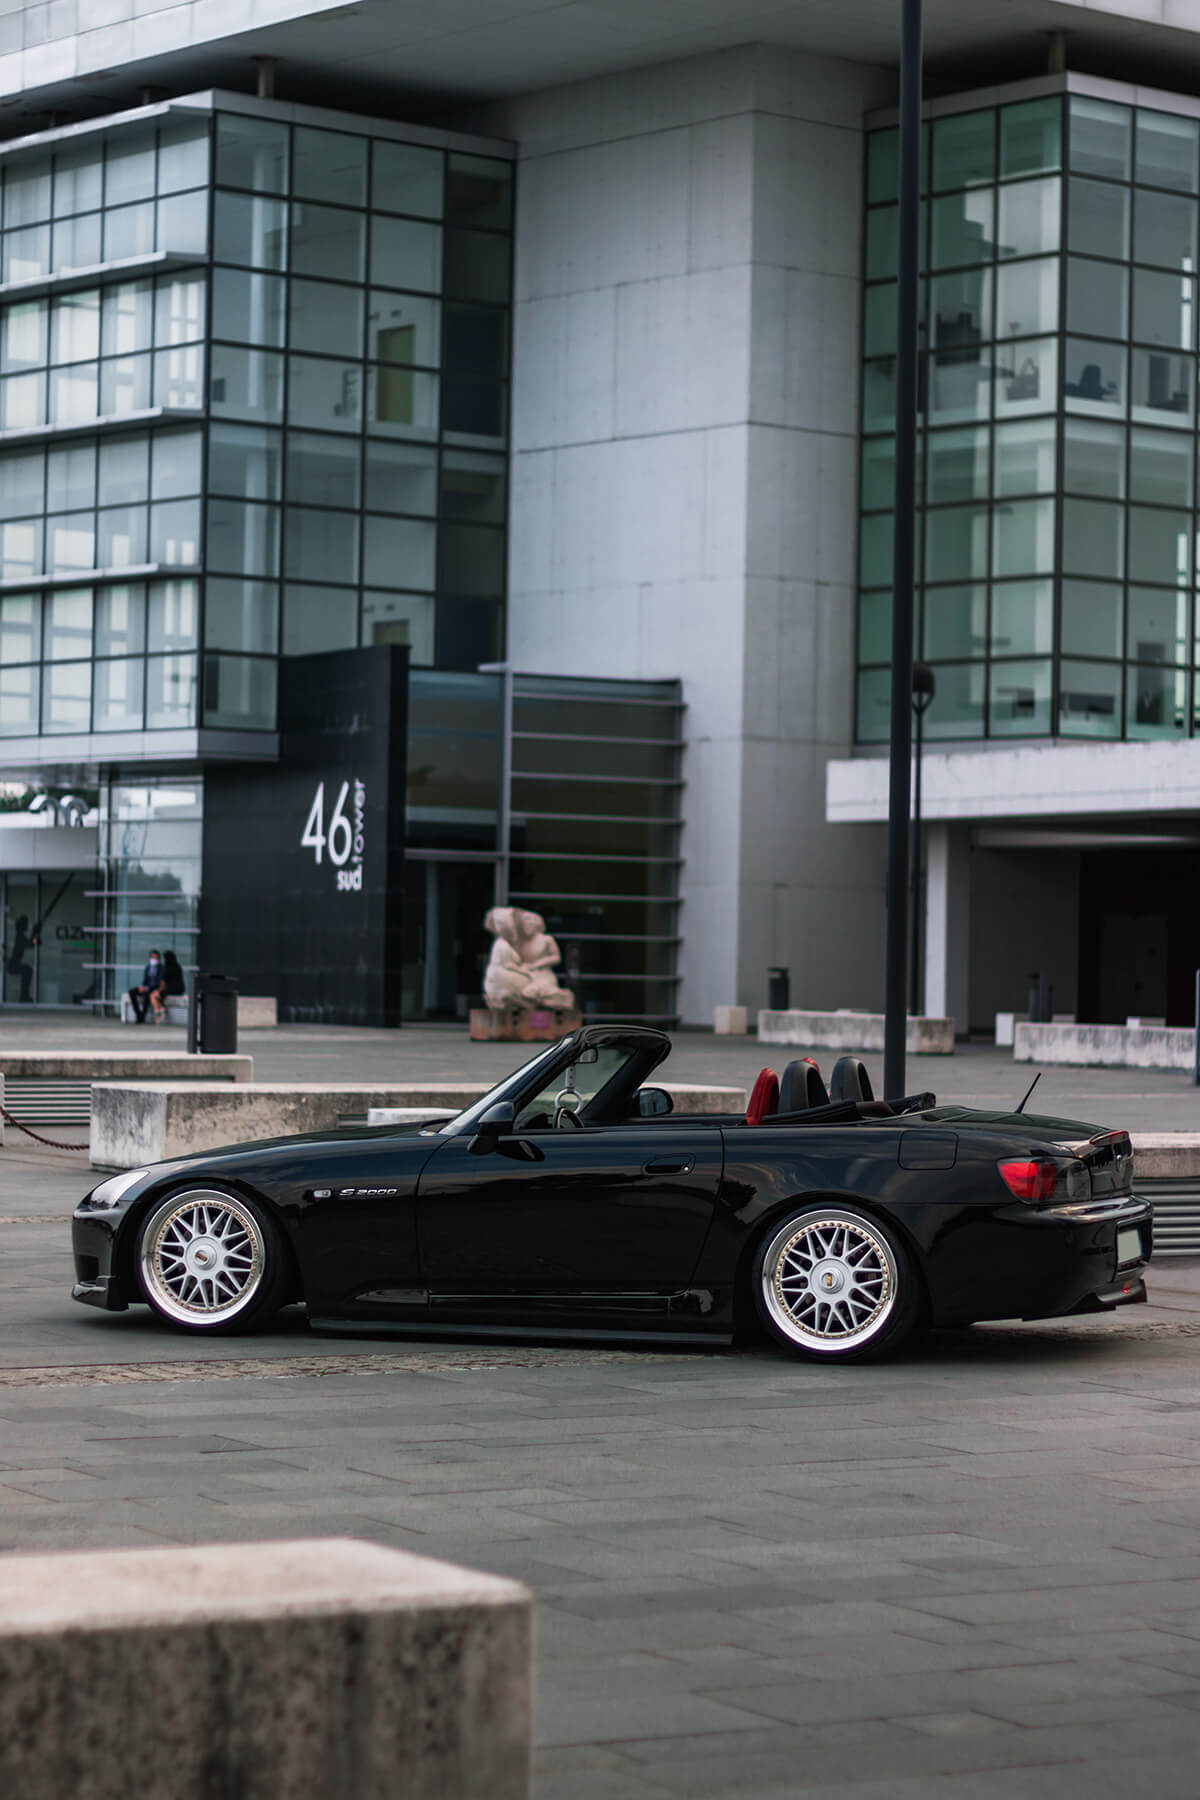 Honda S2000 Stance with lowered suspension